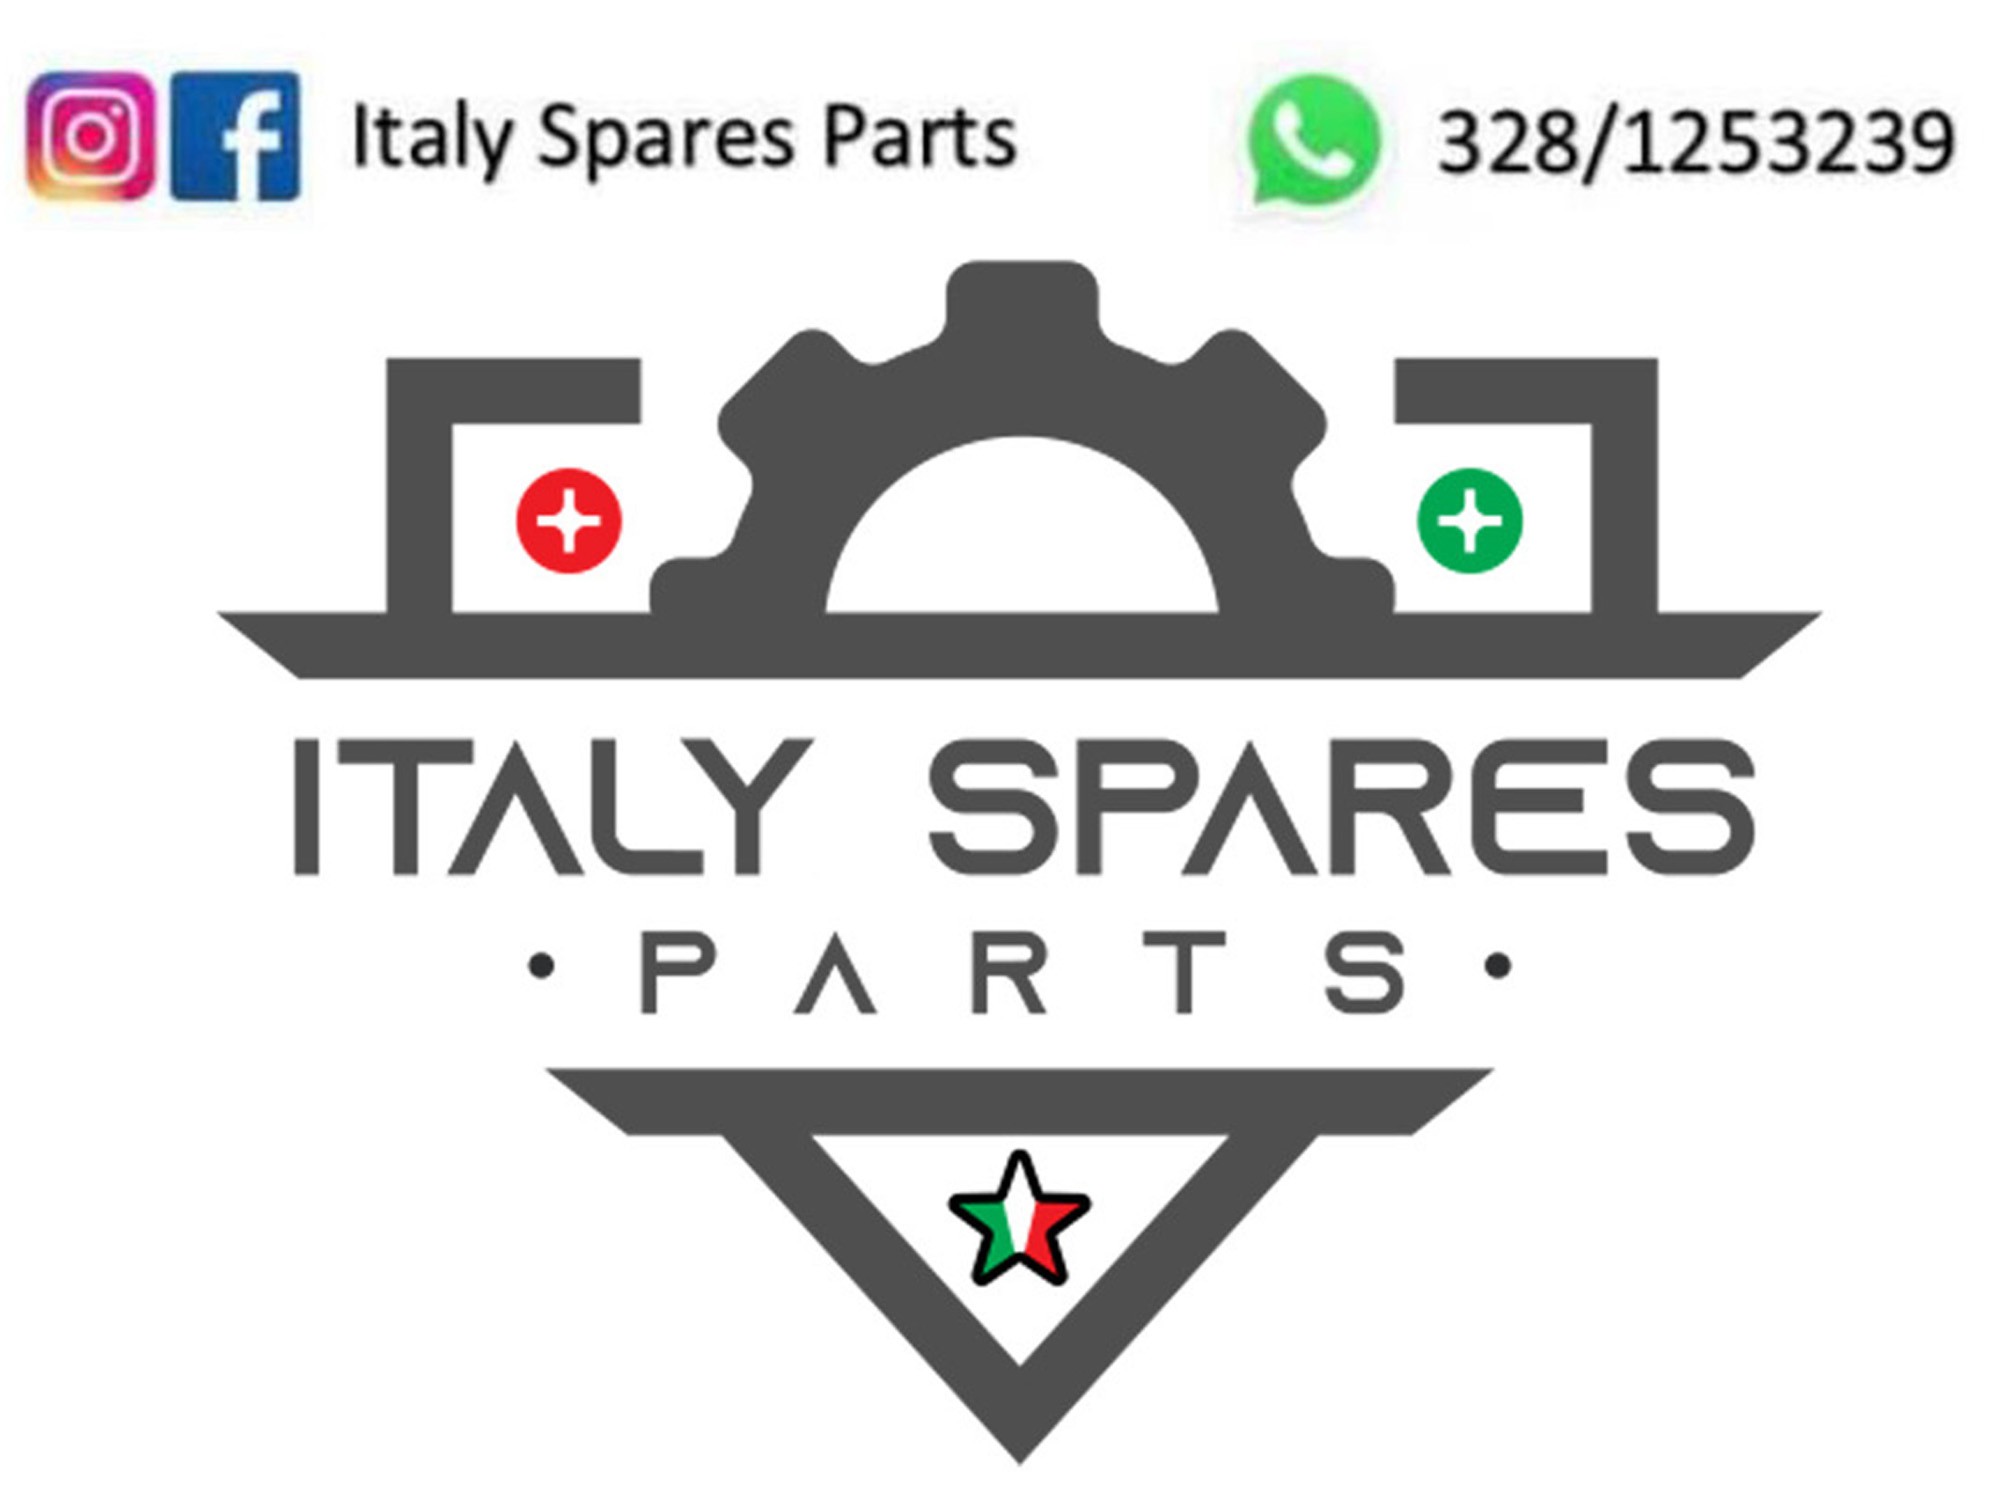 Italy Spares Parts by Autoricambi Fiuggi s.r.l. 